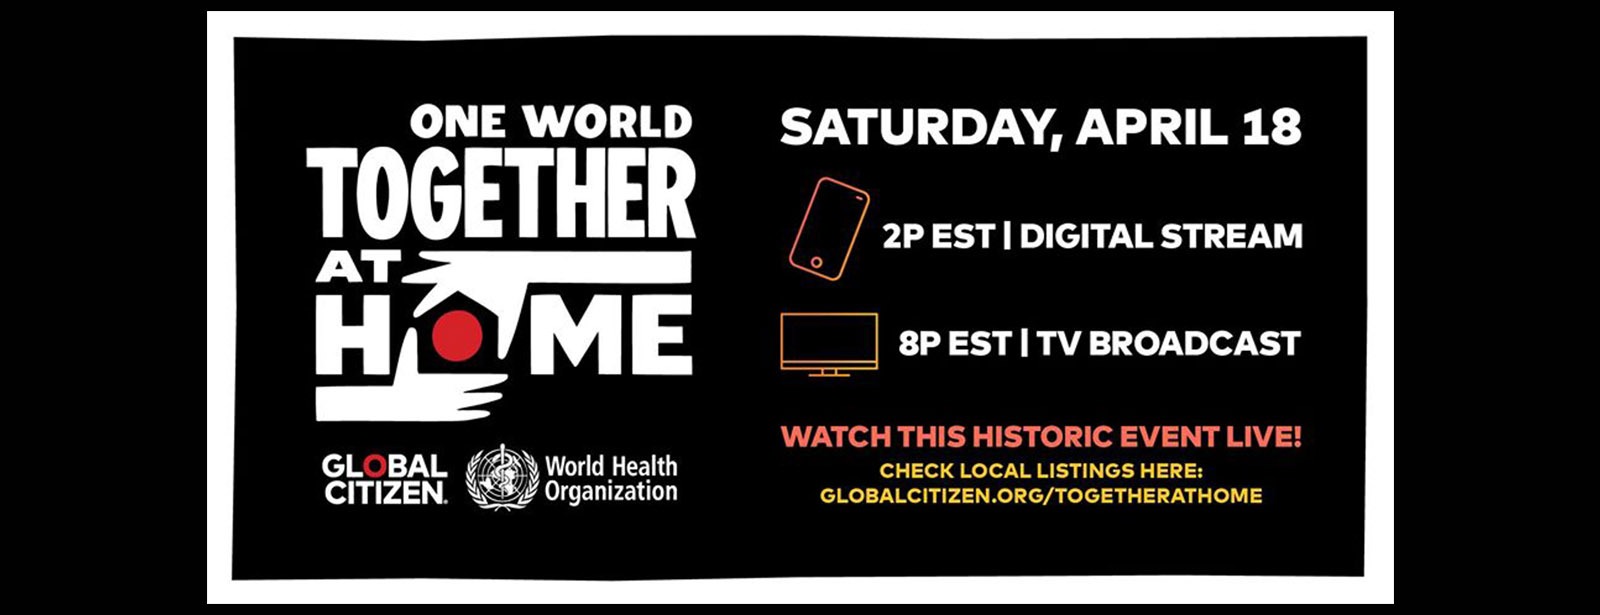 Global Broadcast: Together at Home - Coming Soon in UAE